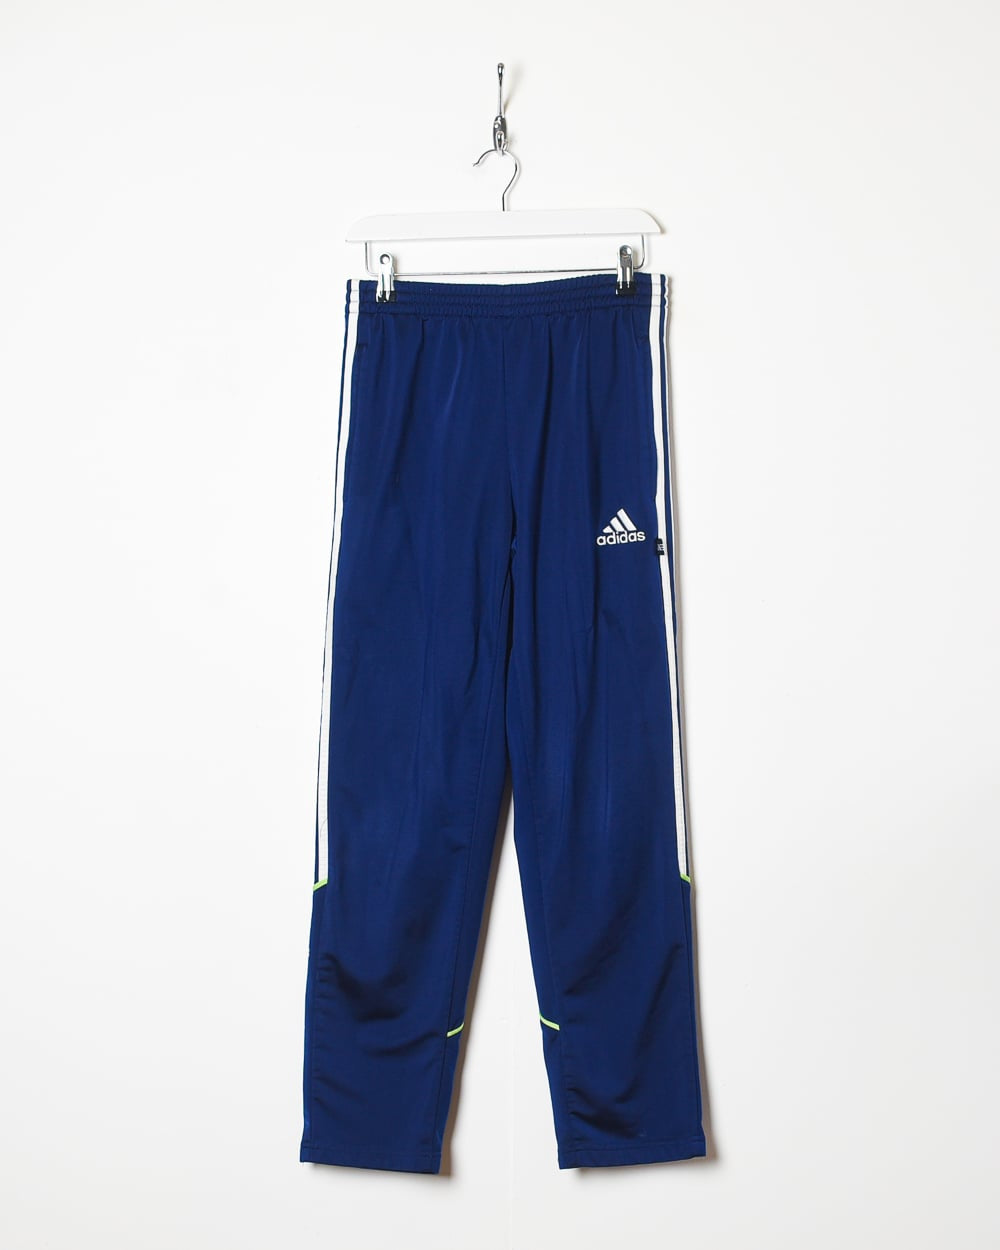 Vintage 90s Navy Adidas Tracksuit Bottoms - Small Polyester